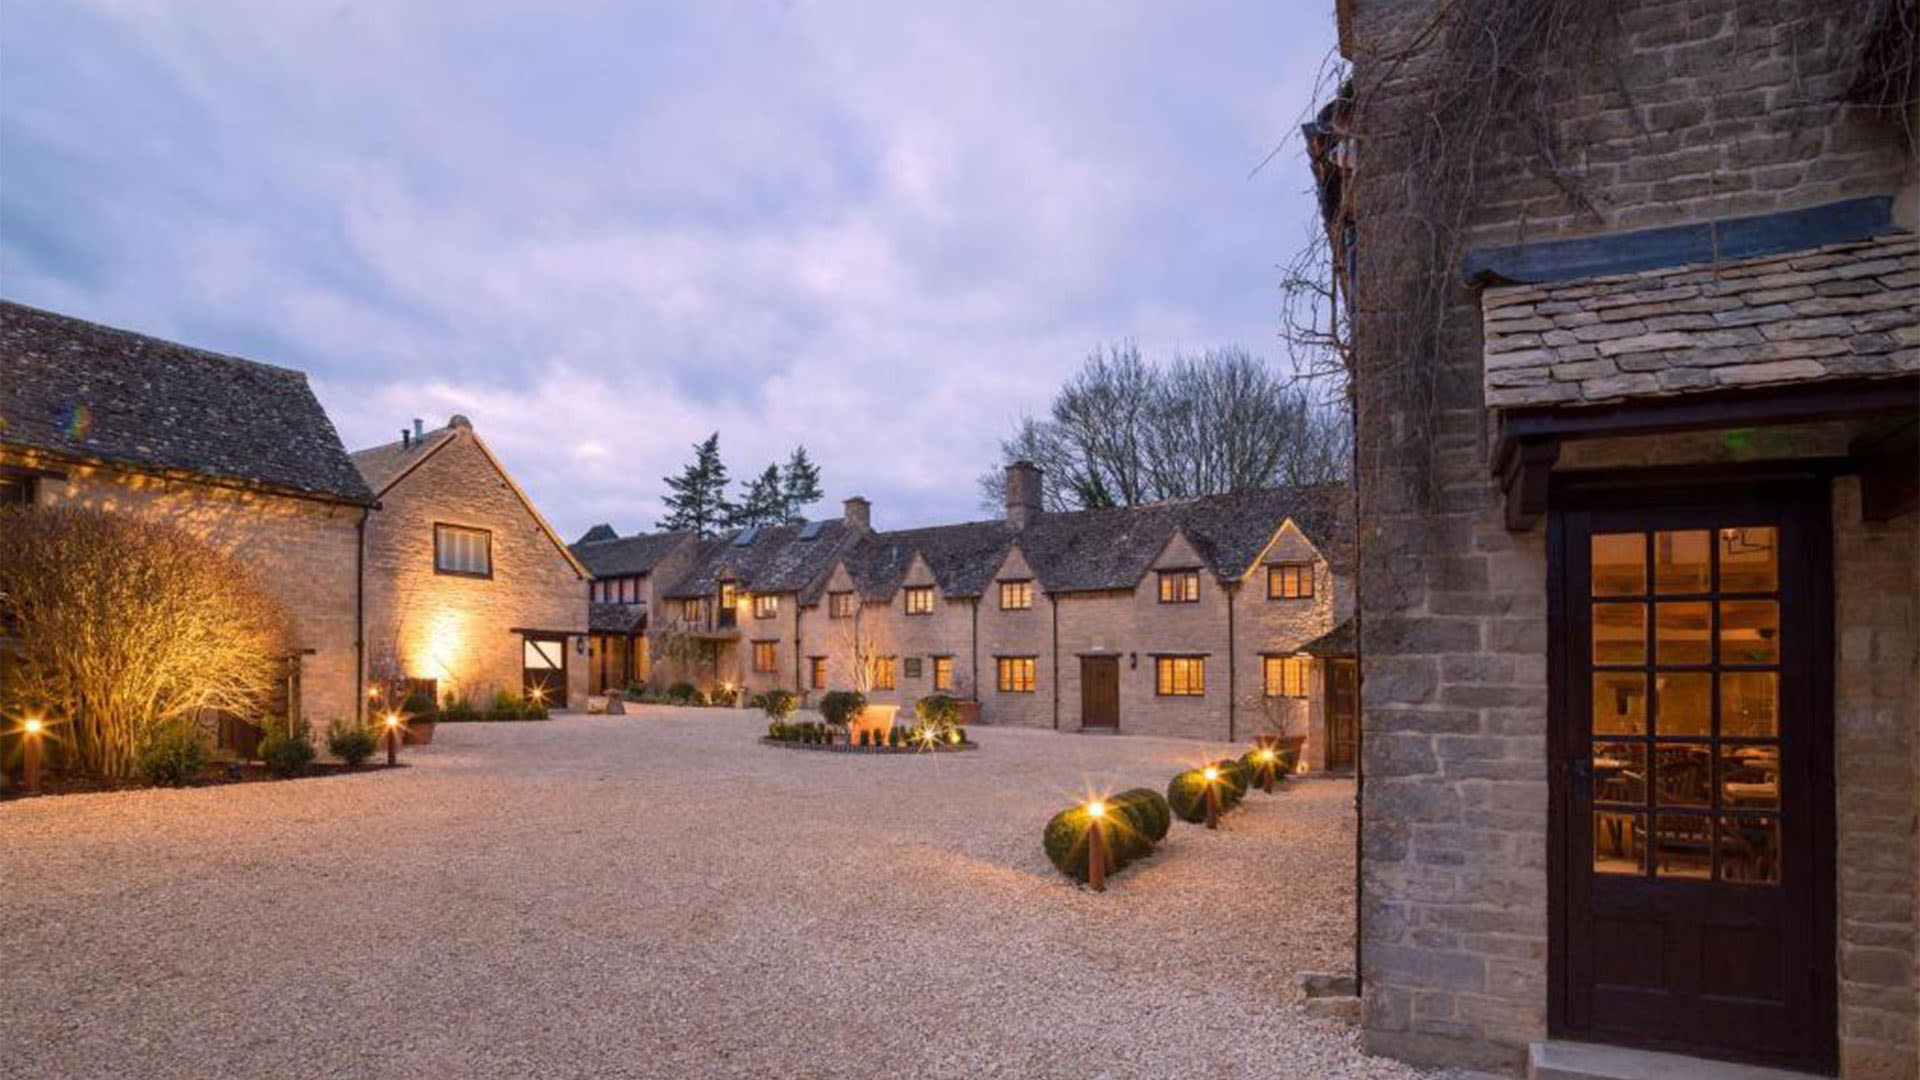 Minster Mill Hotel & Spa in Oxfordshire